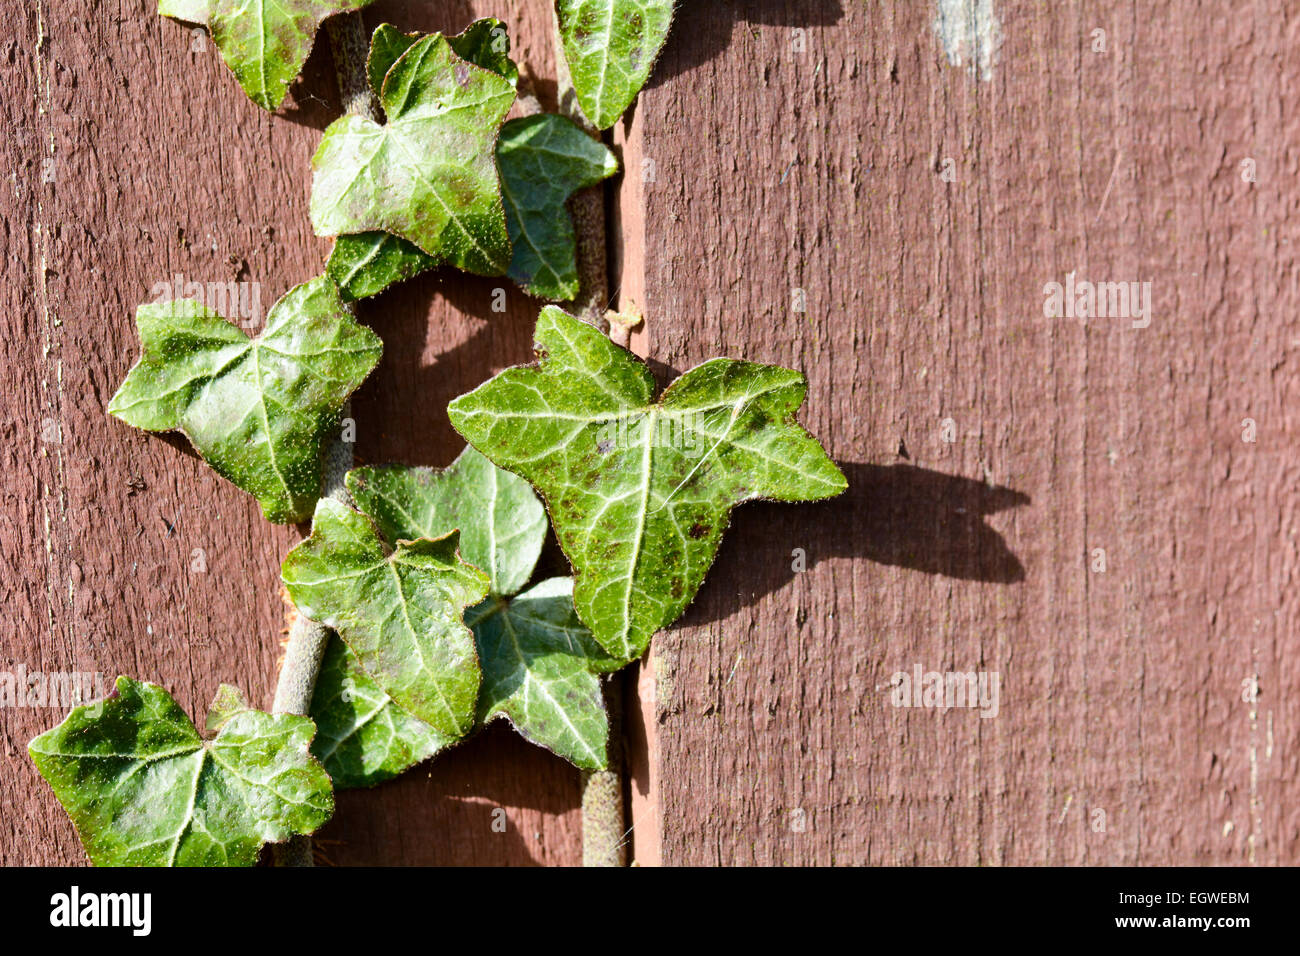 Ivy plant climbing up wooden fence Stock Photo